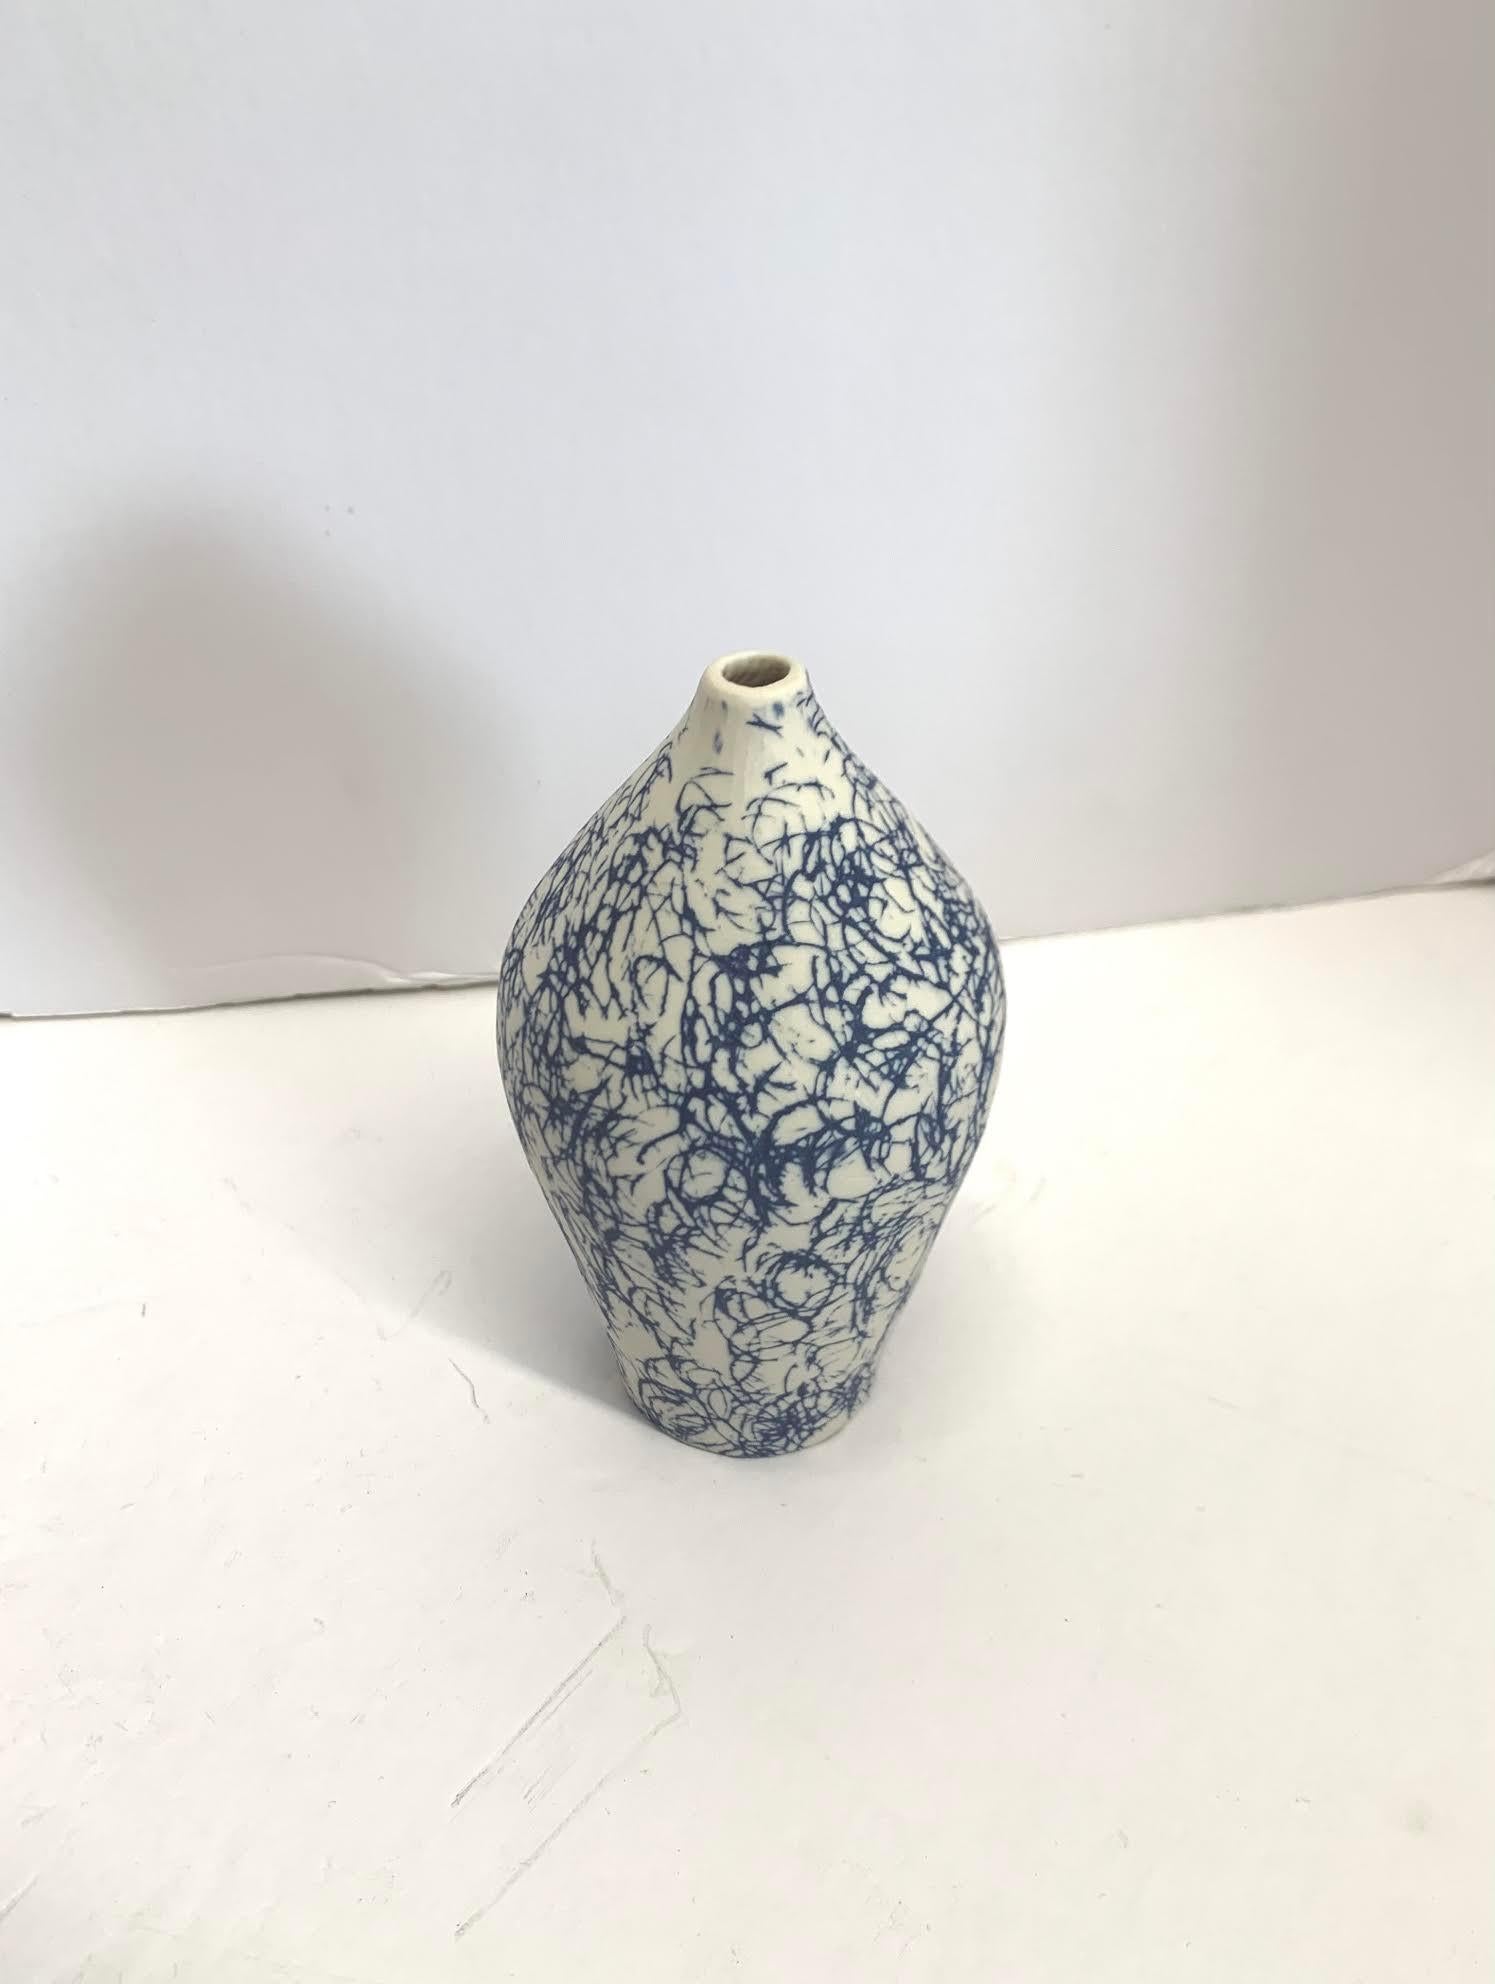 Contemporary Italian hand made ceramic blue vase with white confetti design.
Matte glaze.
Part of a large collection of blue and white diminutive vases.
See image #4.